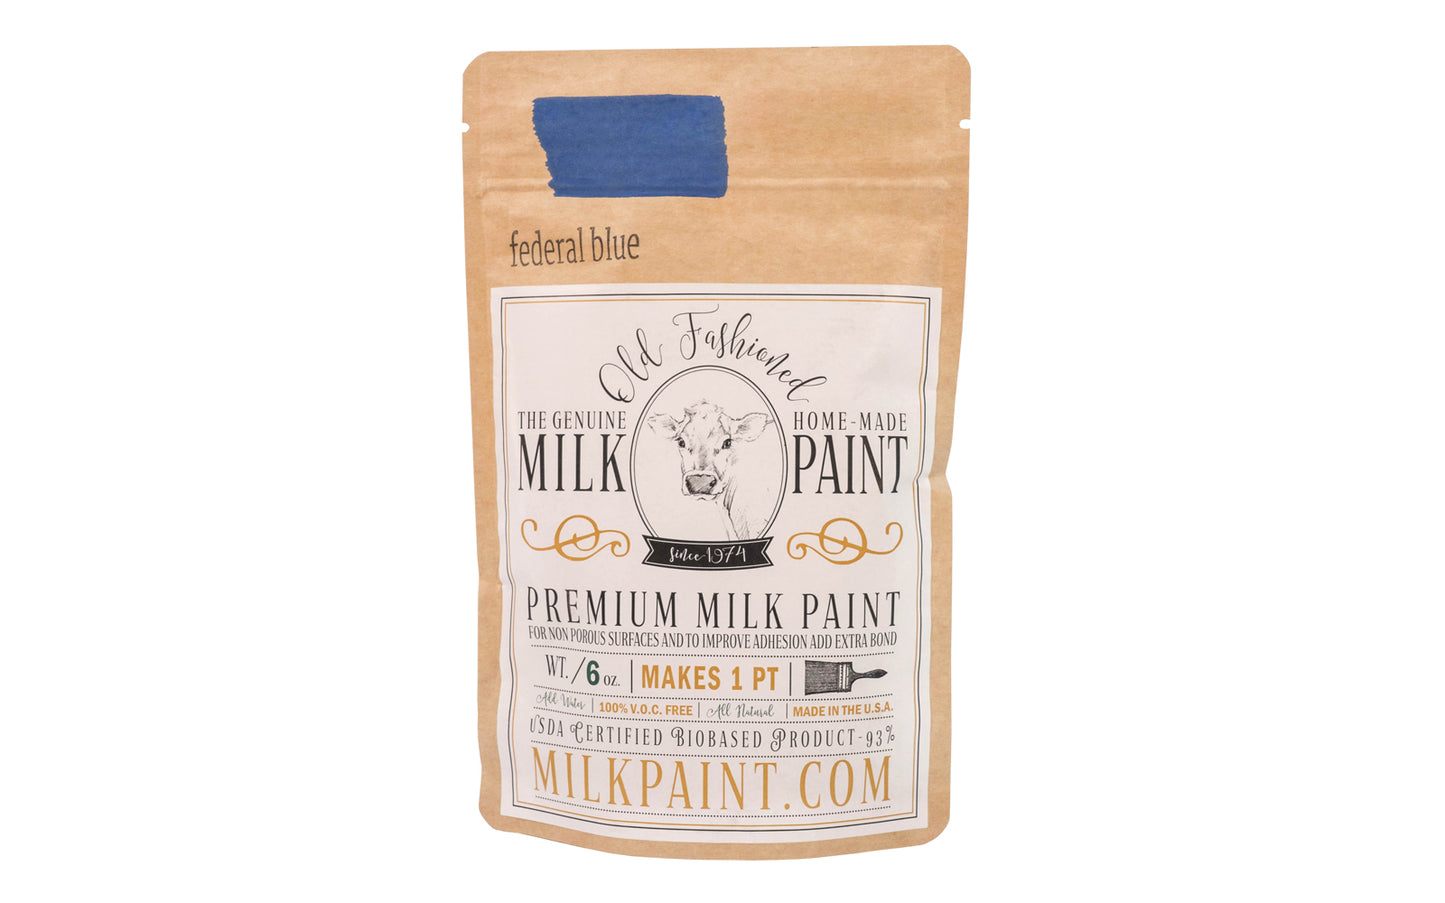 This Milk Paint color is "Federal blue" color - Bright cobalt blue. Comes in a powder form, you can control how thick/thin you mix the paint. Use it as you would regular paint, thinner for a wash/stain or thicker to create texture. Environmentally safe, non-toxic & is food safe. 100% VOC free. Powder Paint